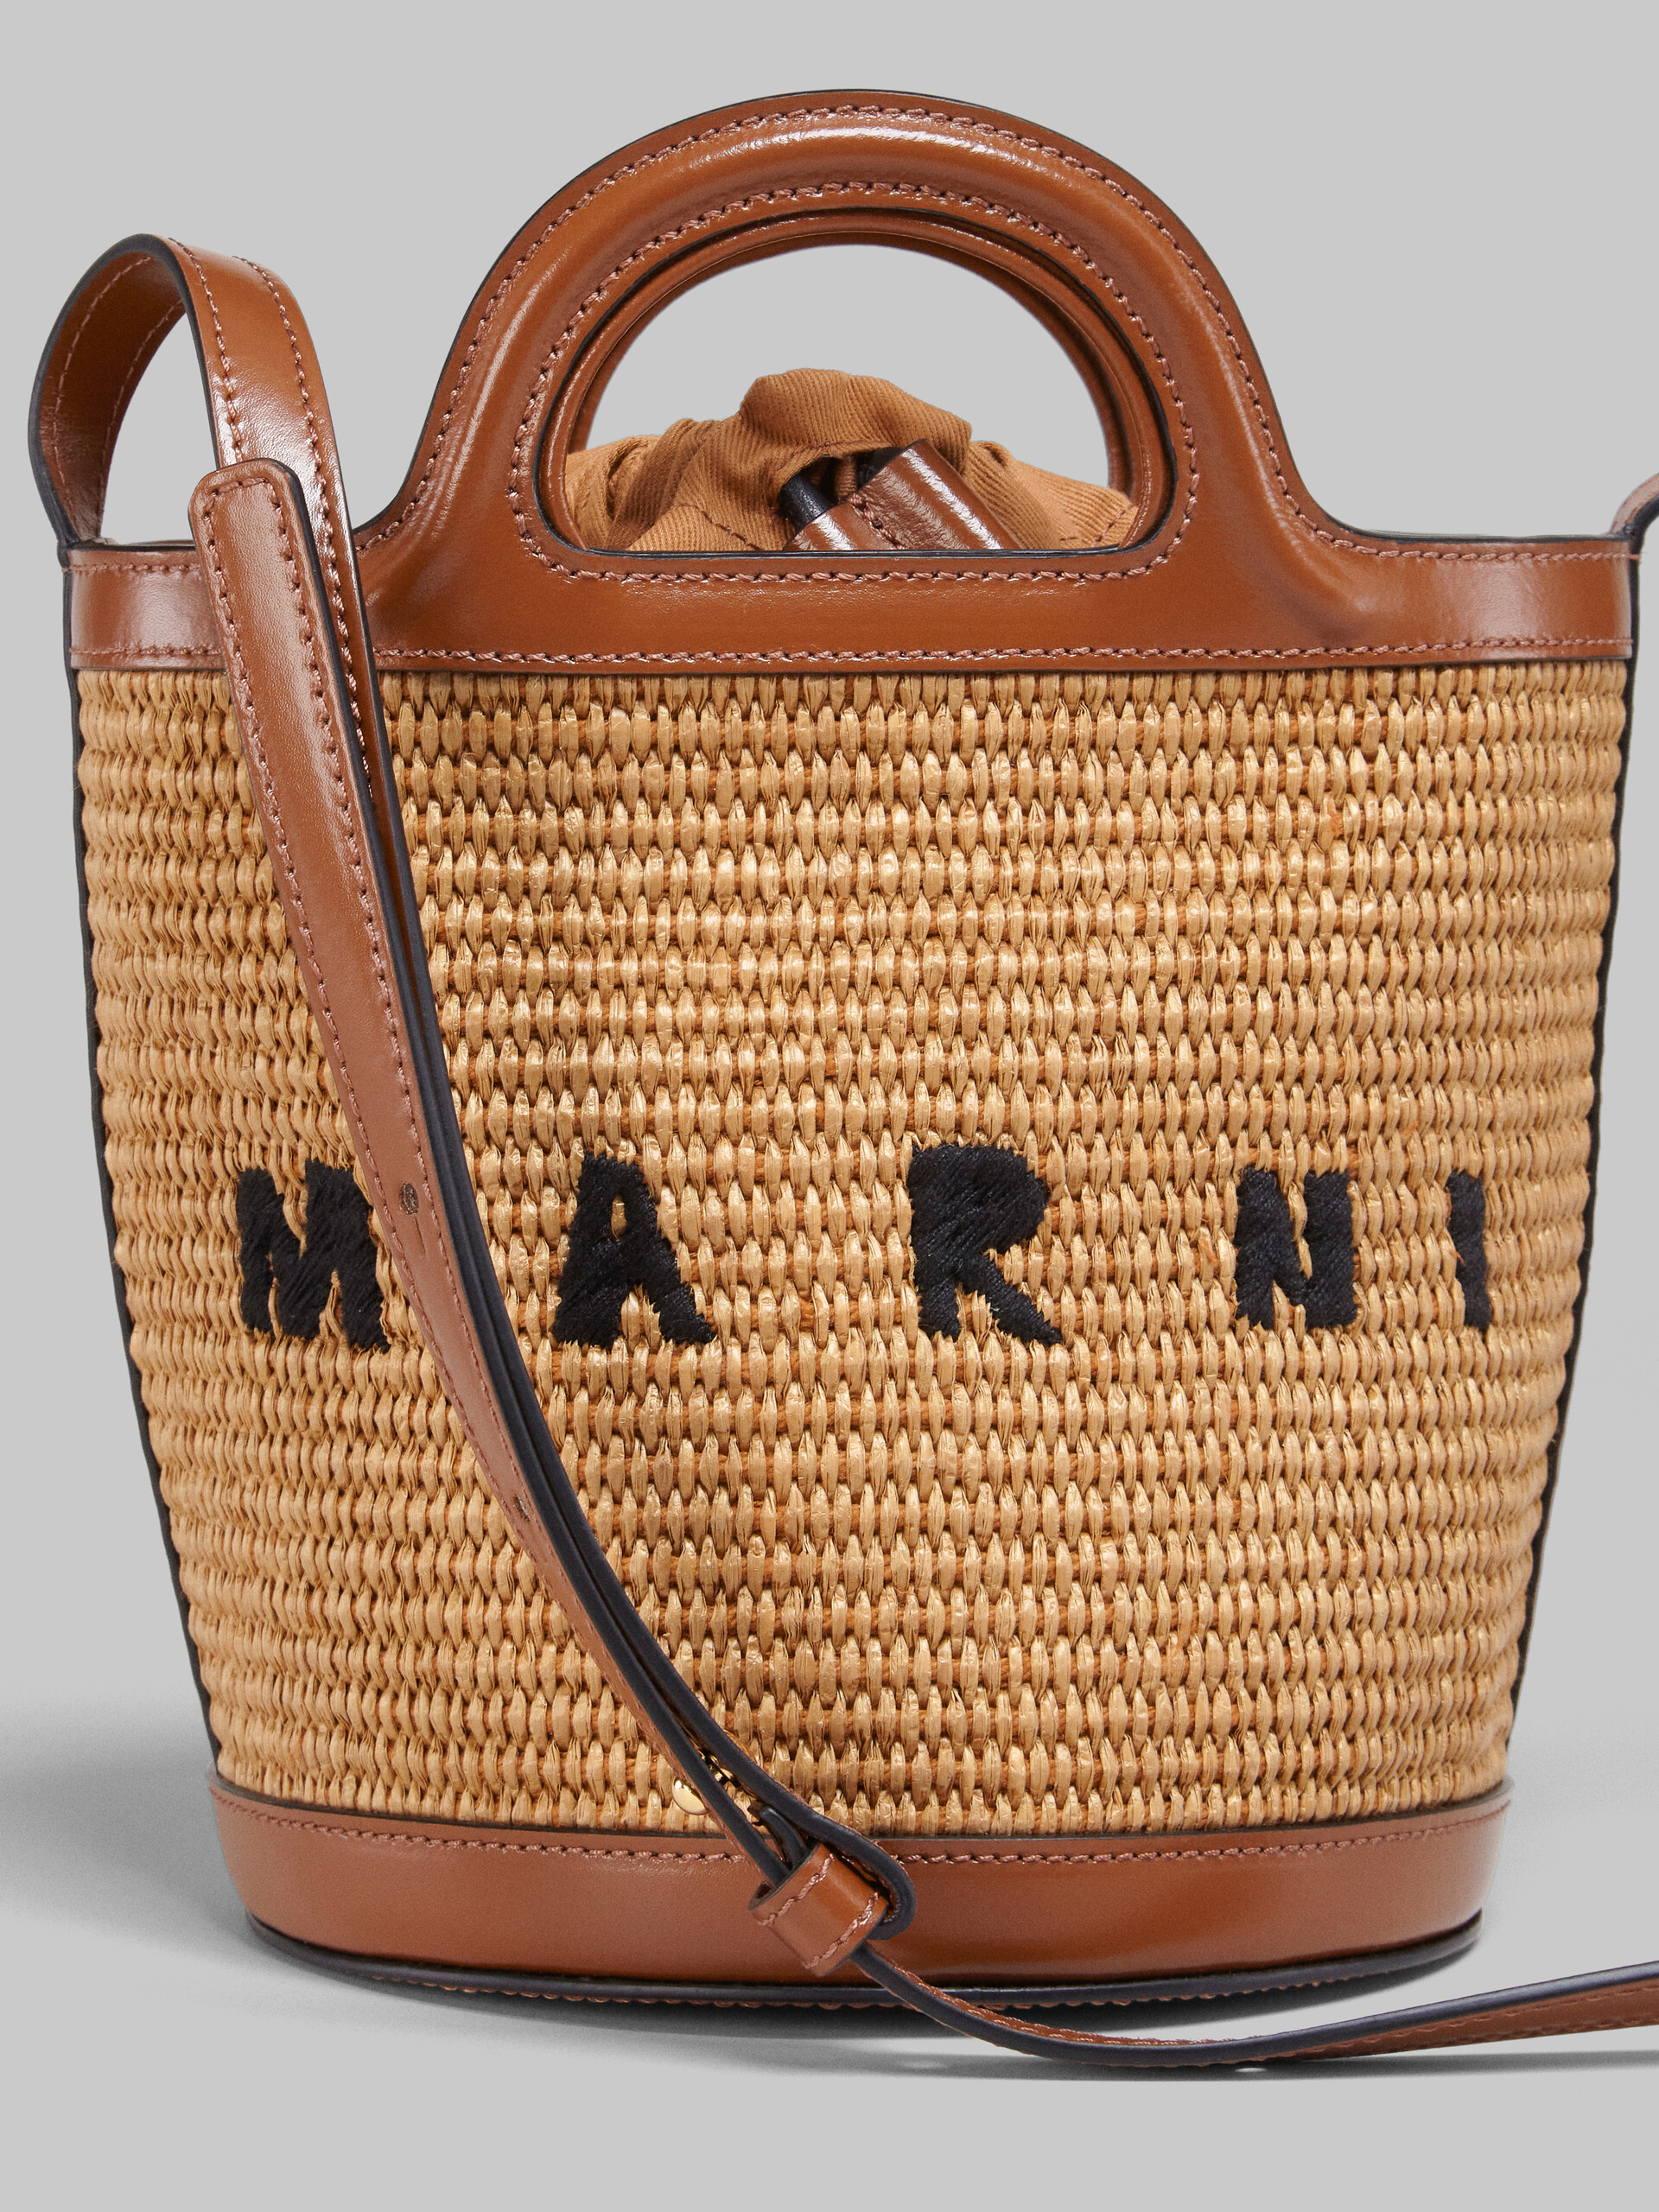 TROPICALIA mini bucket bag in brown leather and raffia - Shoulder Bags - Image 4